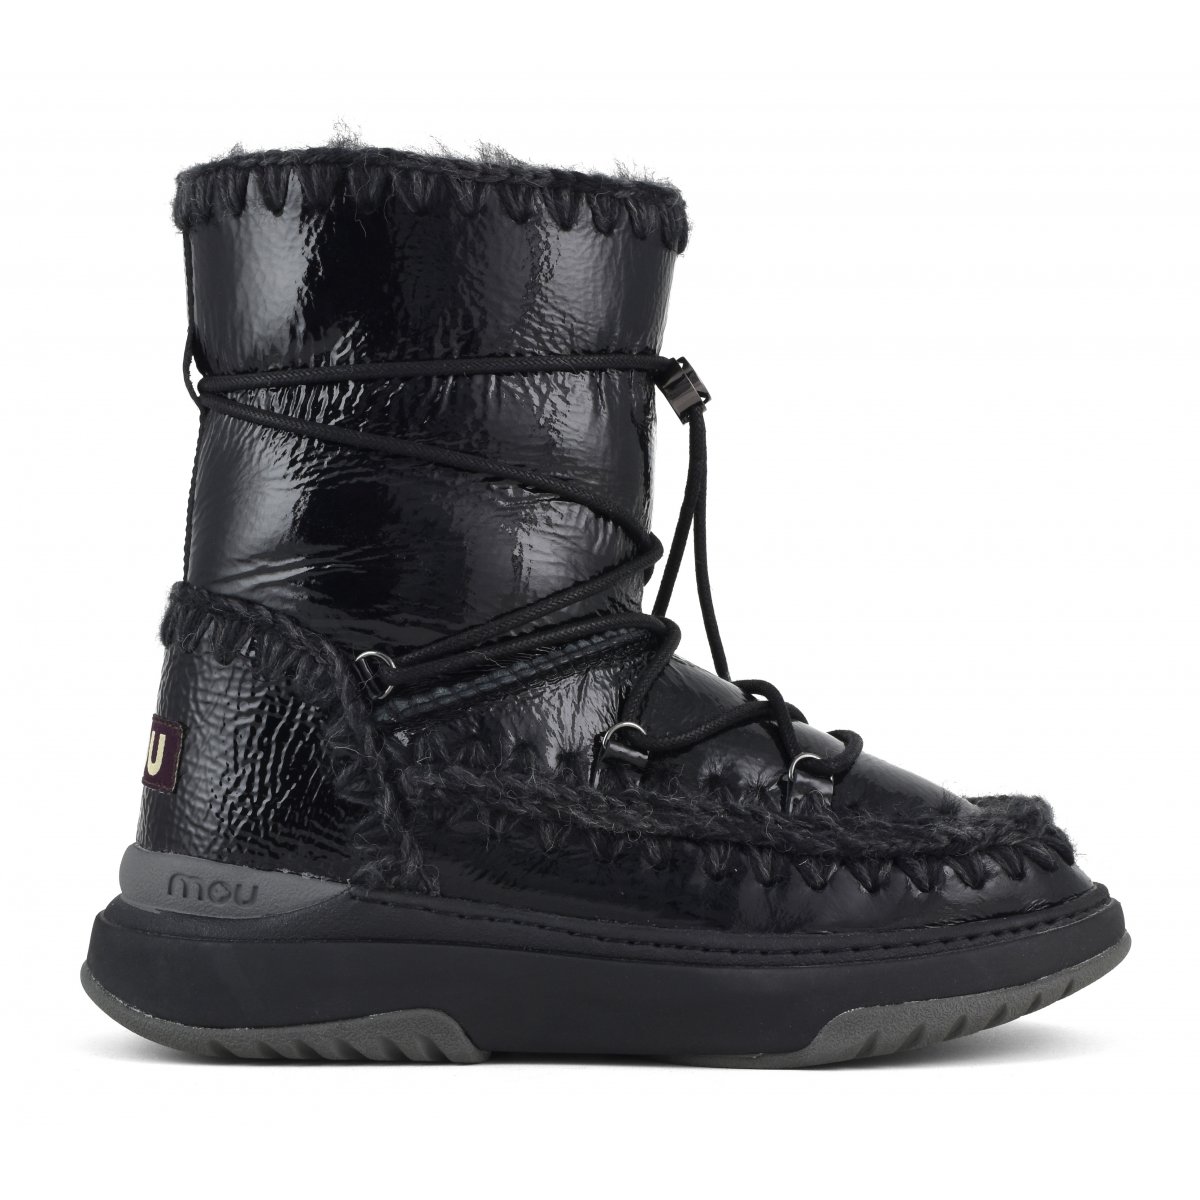 Shelling mental carriage Jogger snowboot short